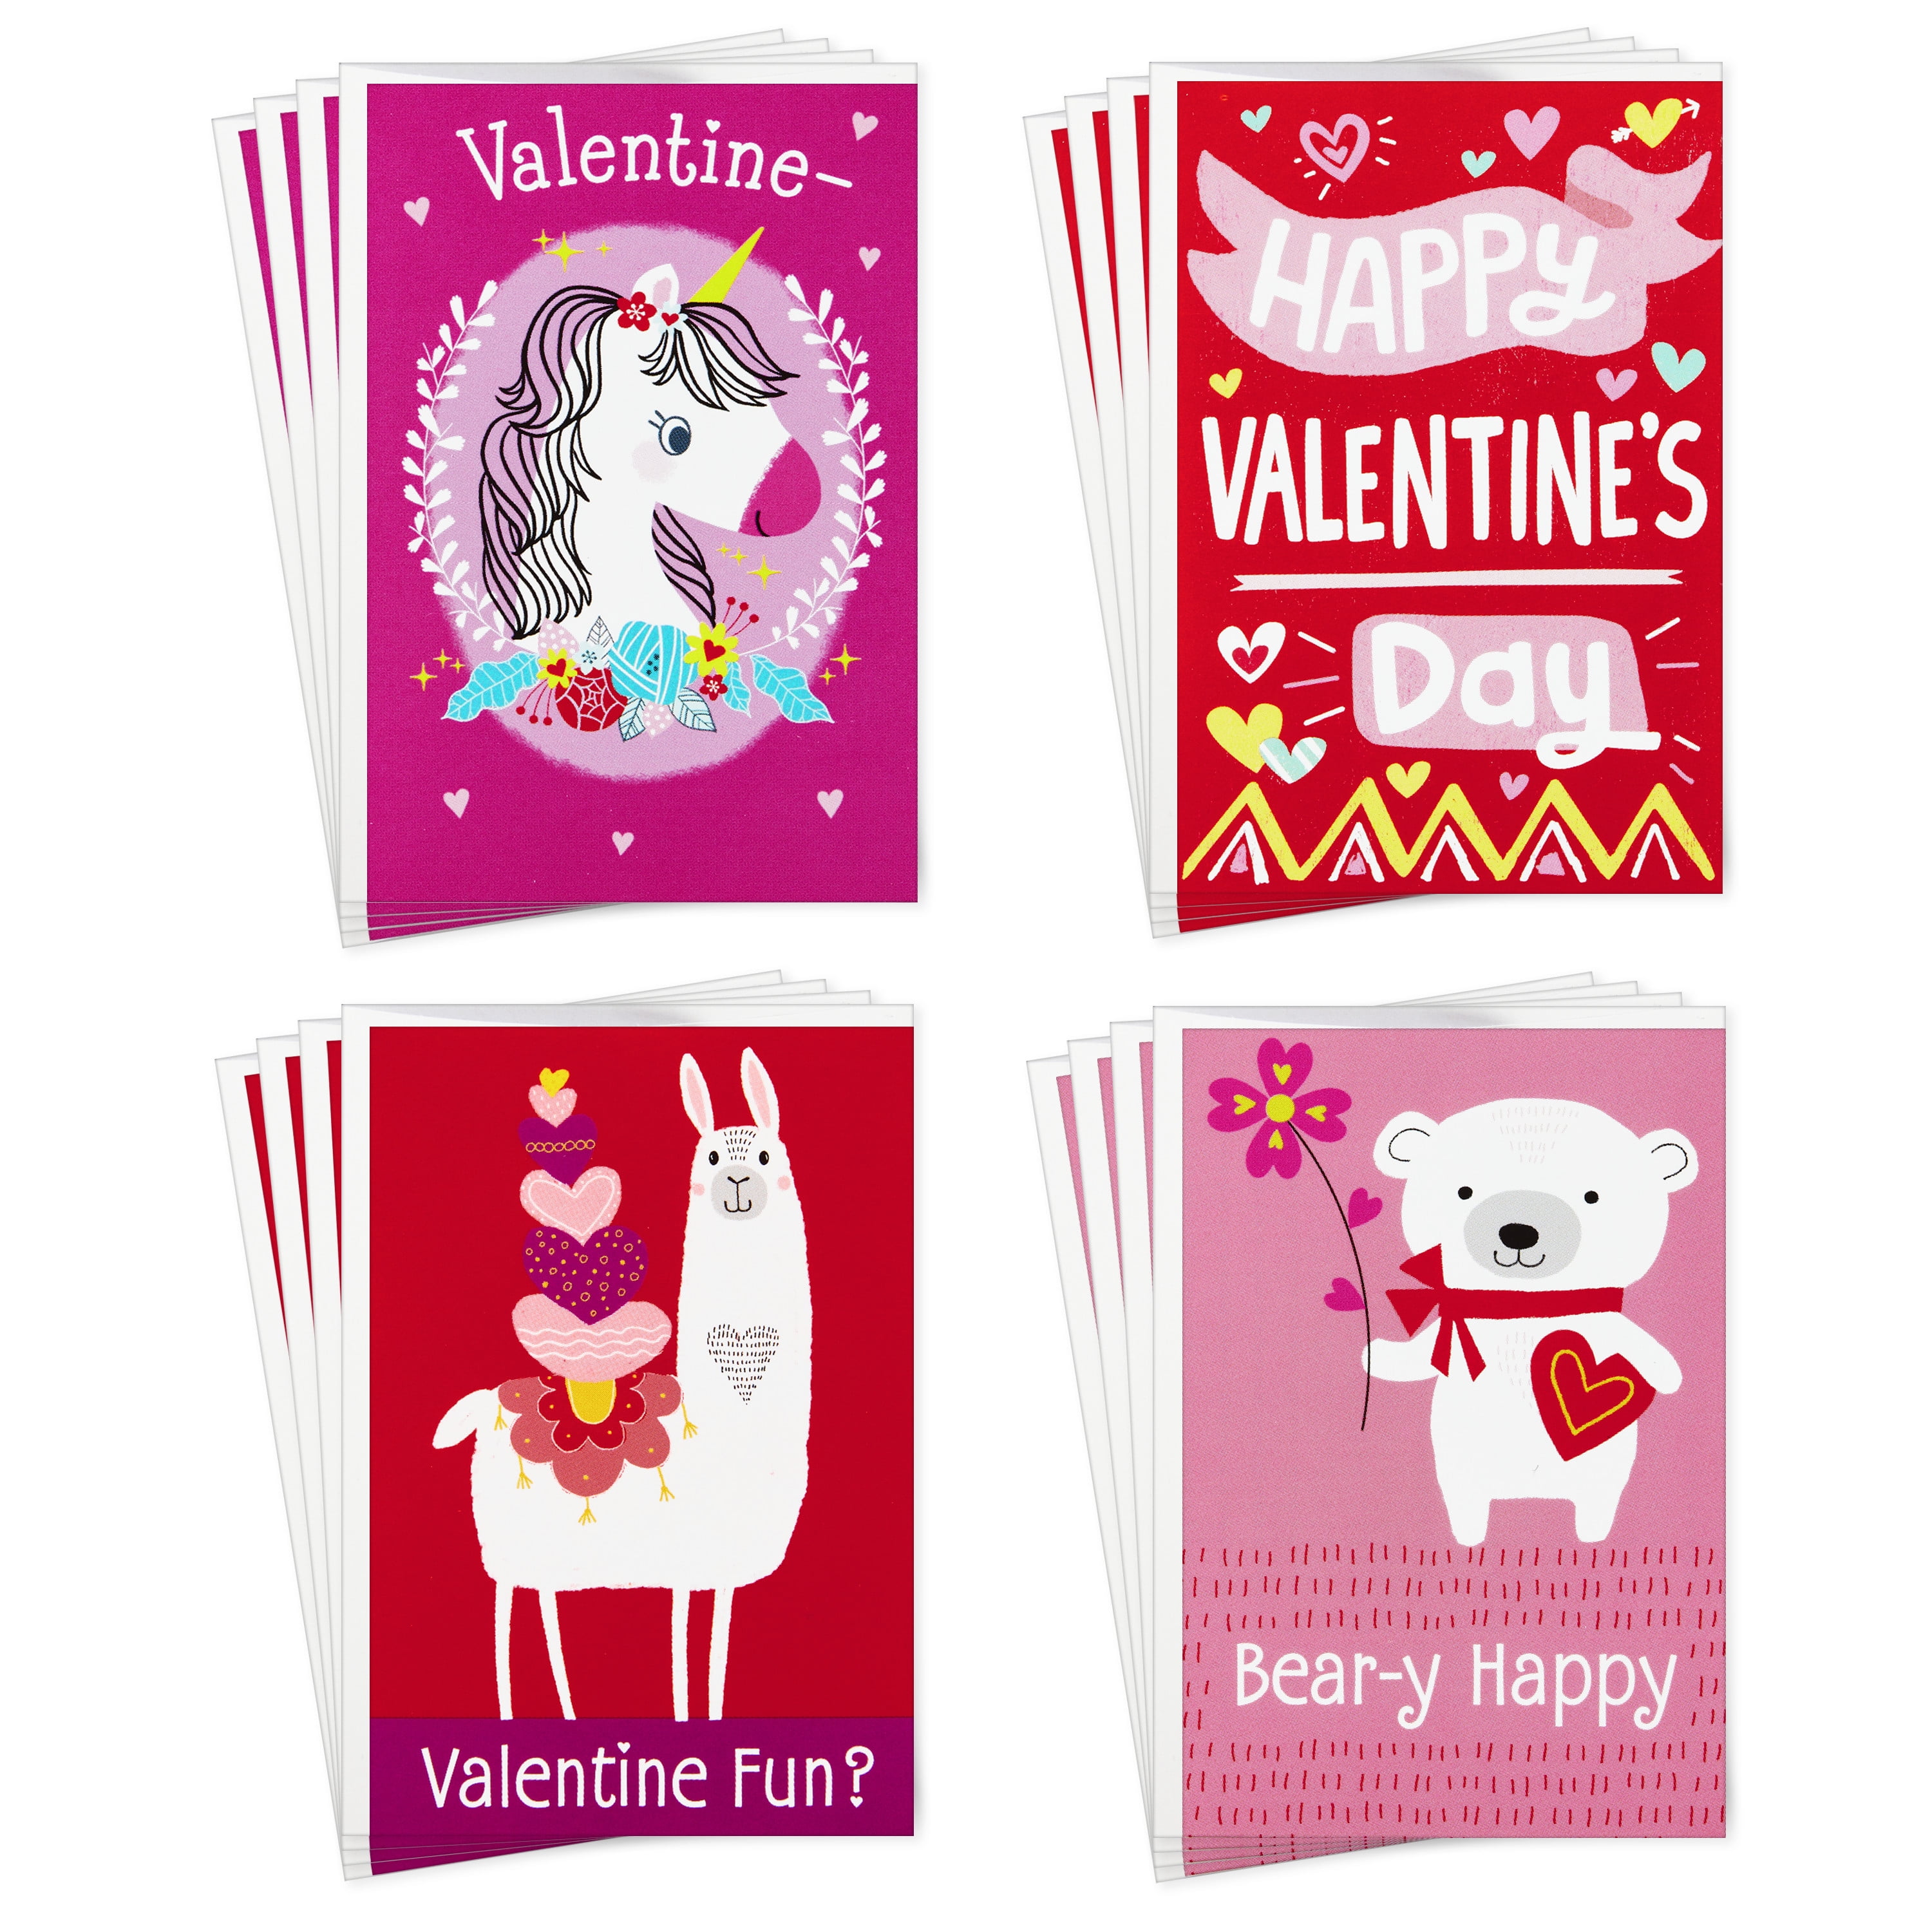 28 Cards and Pencils Valentines Day Cards for Kids Peaceable Kingdom Hot Dog Valentines Assortment 